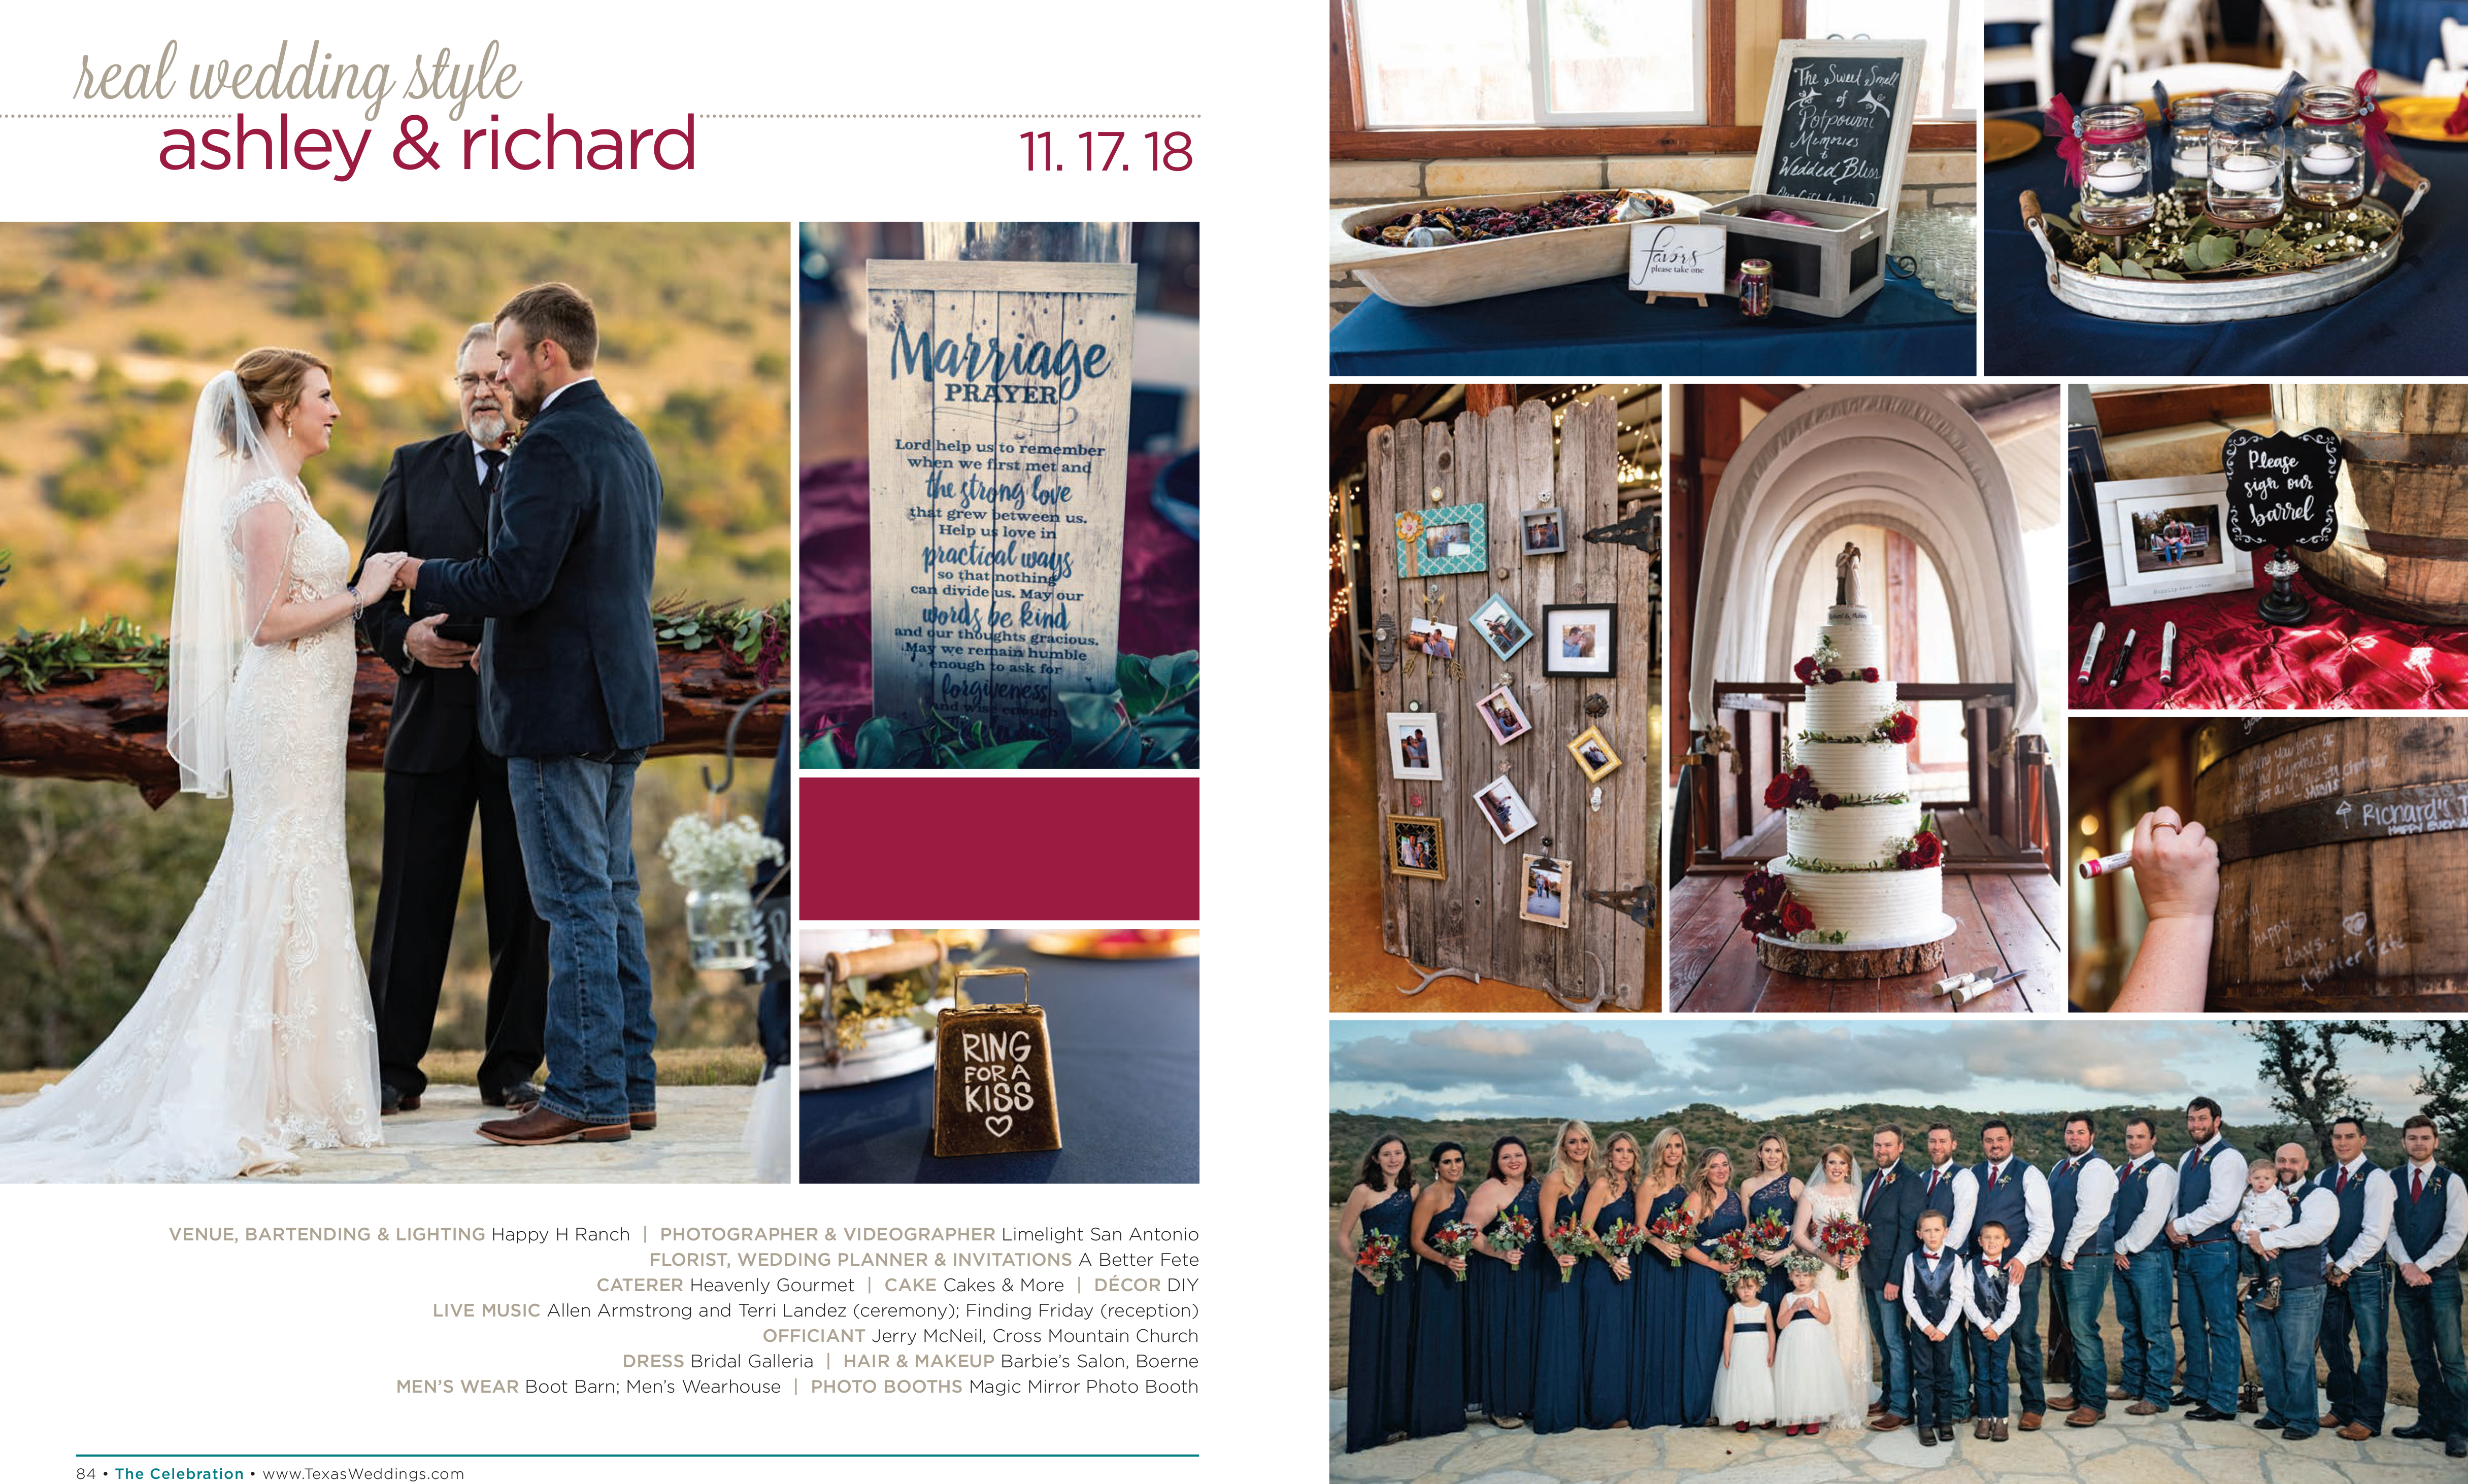 Ashley & Richard in their Real Wedding Page in the Spring/Summer 2019 Texas Wedding Guide